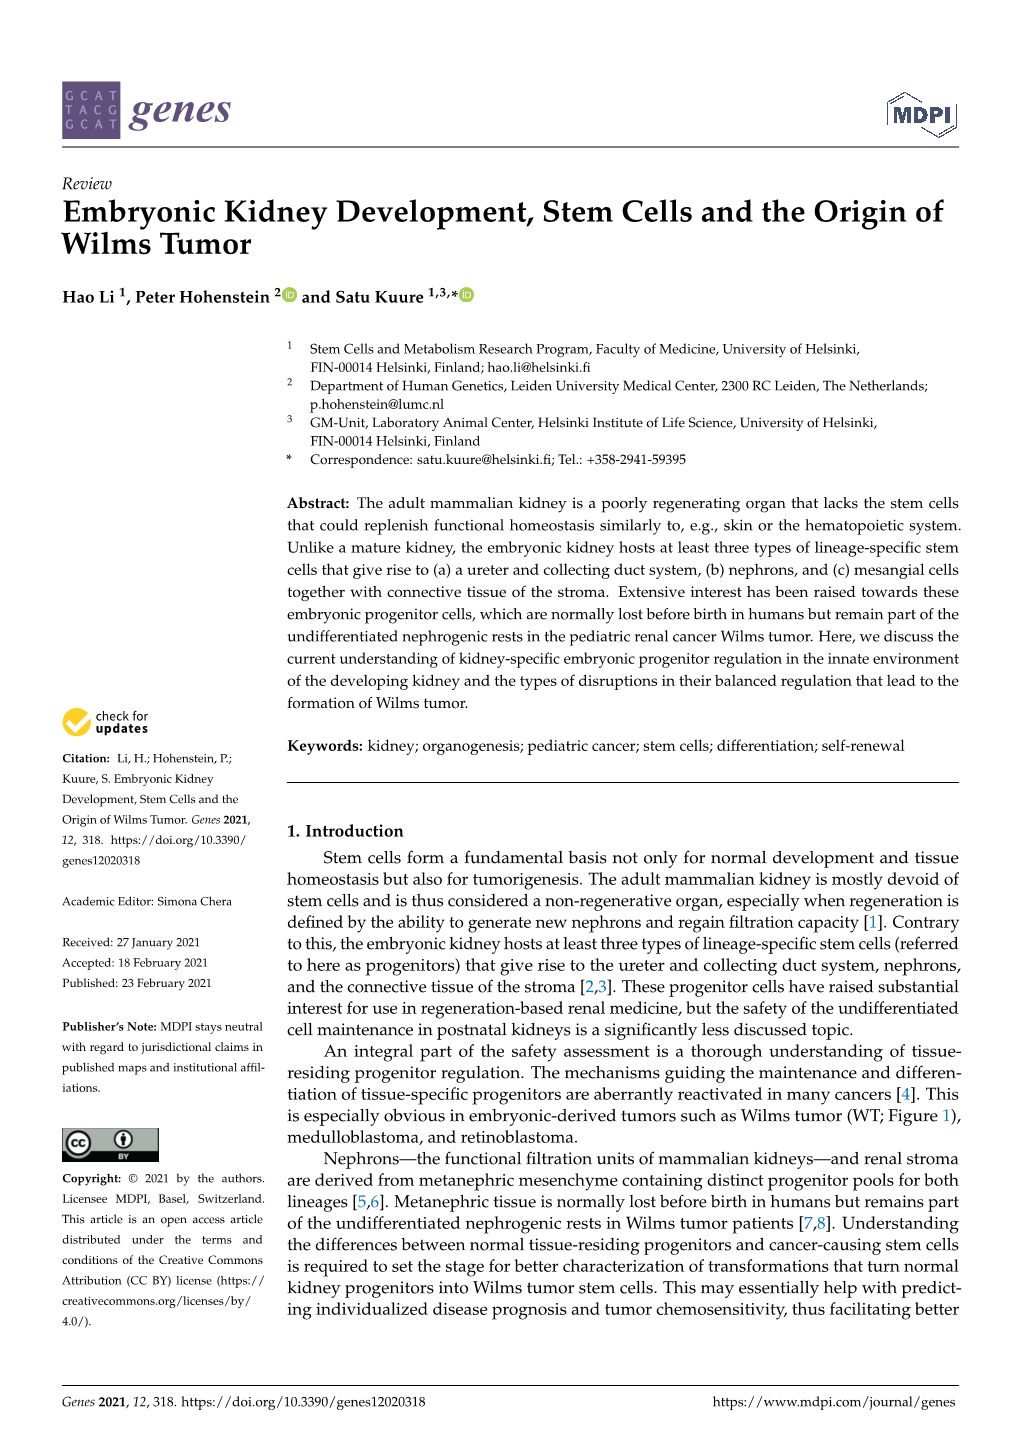 Embryonic Kidney Development, Stem Cells and the Origin of Wilms Tumor